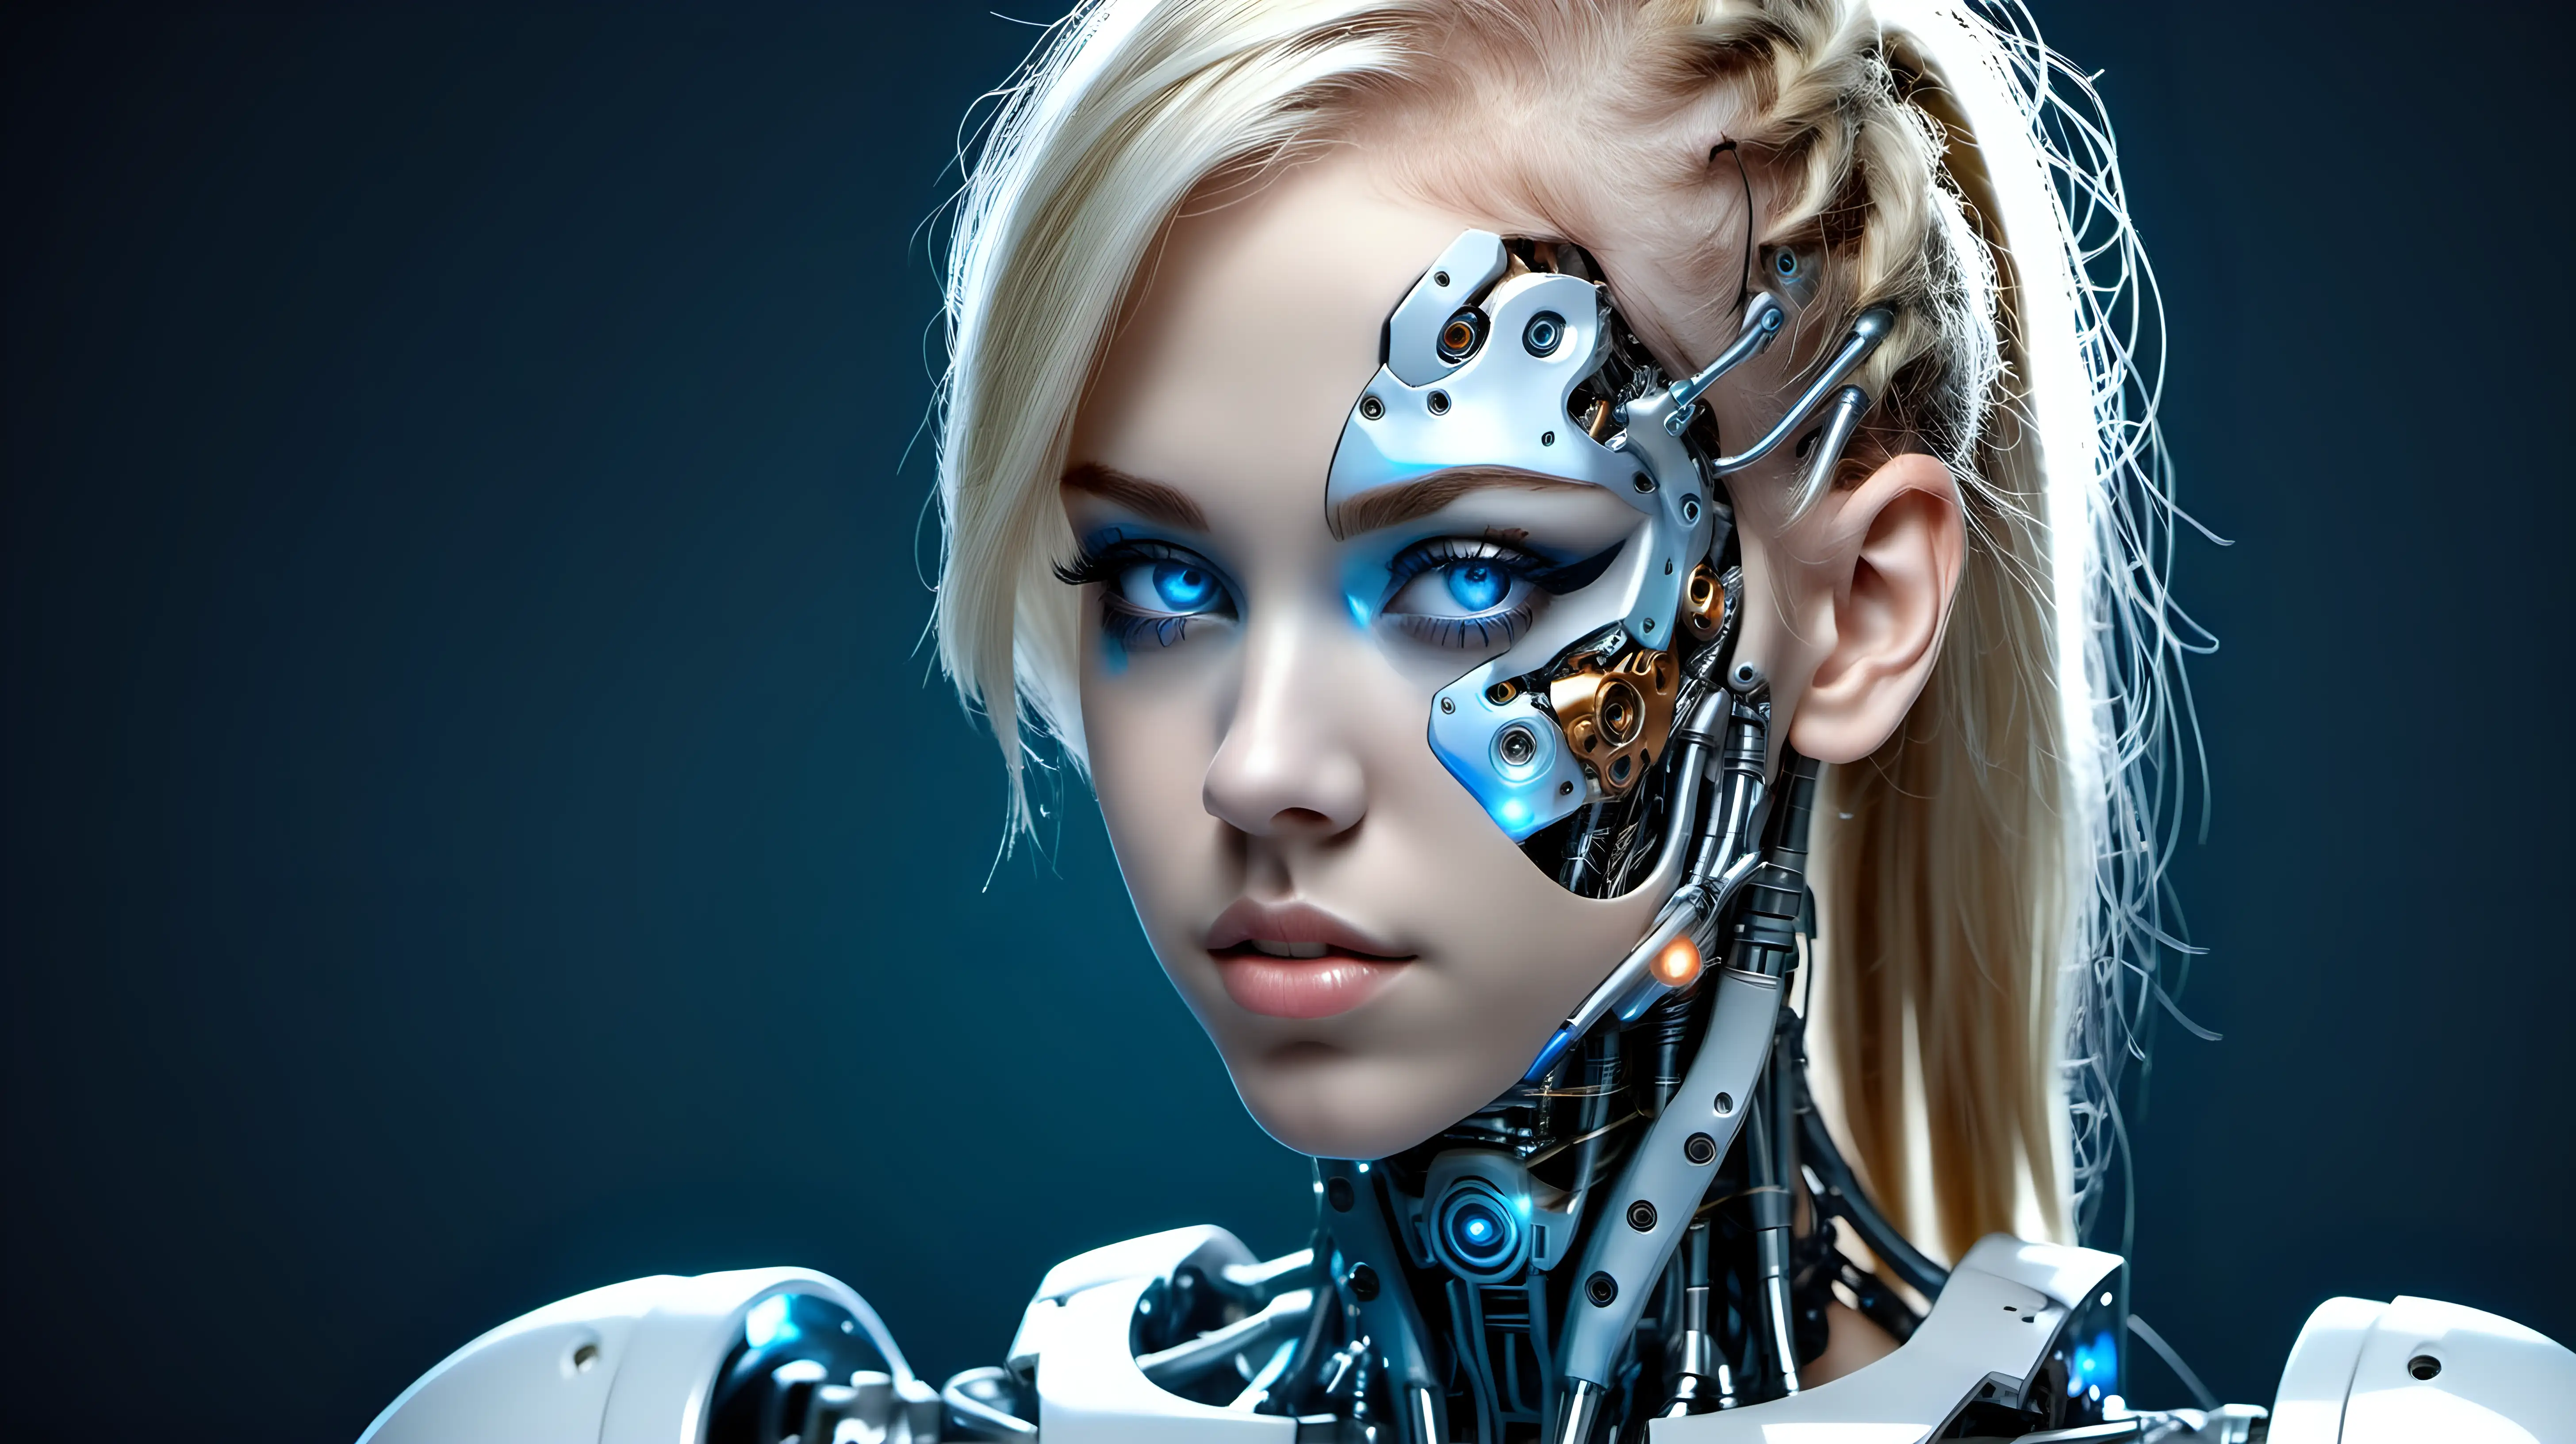 Cyborg woman, 18 years old. She has a cyborg face, but she is extremely beautiful. Blonde. Blue eyes.